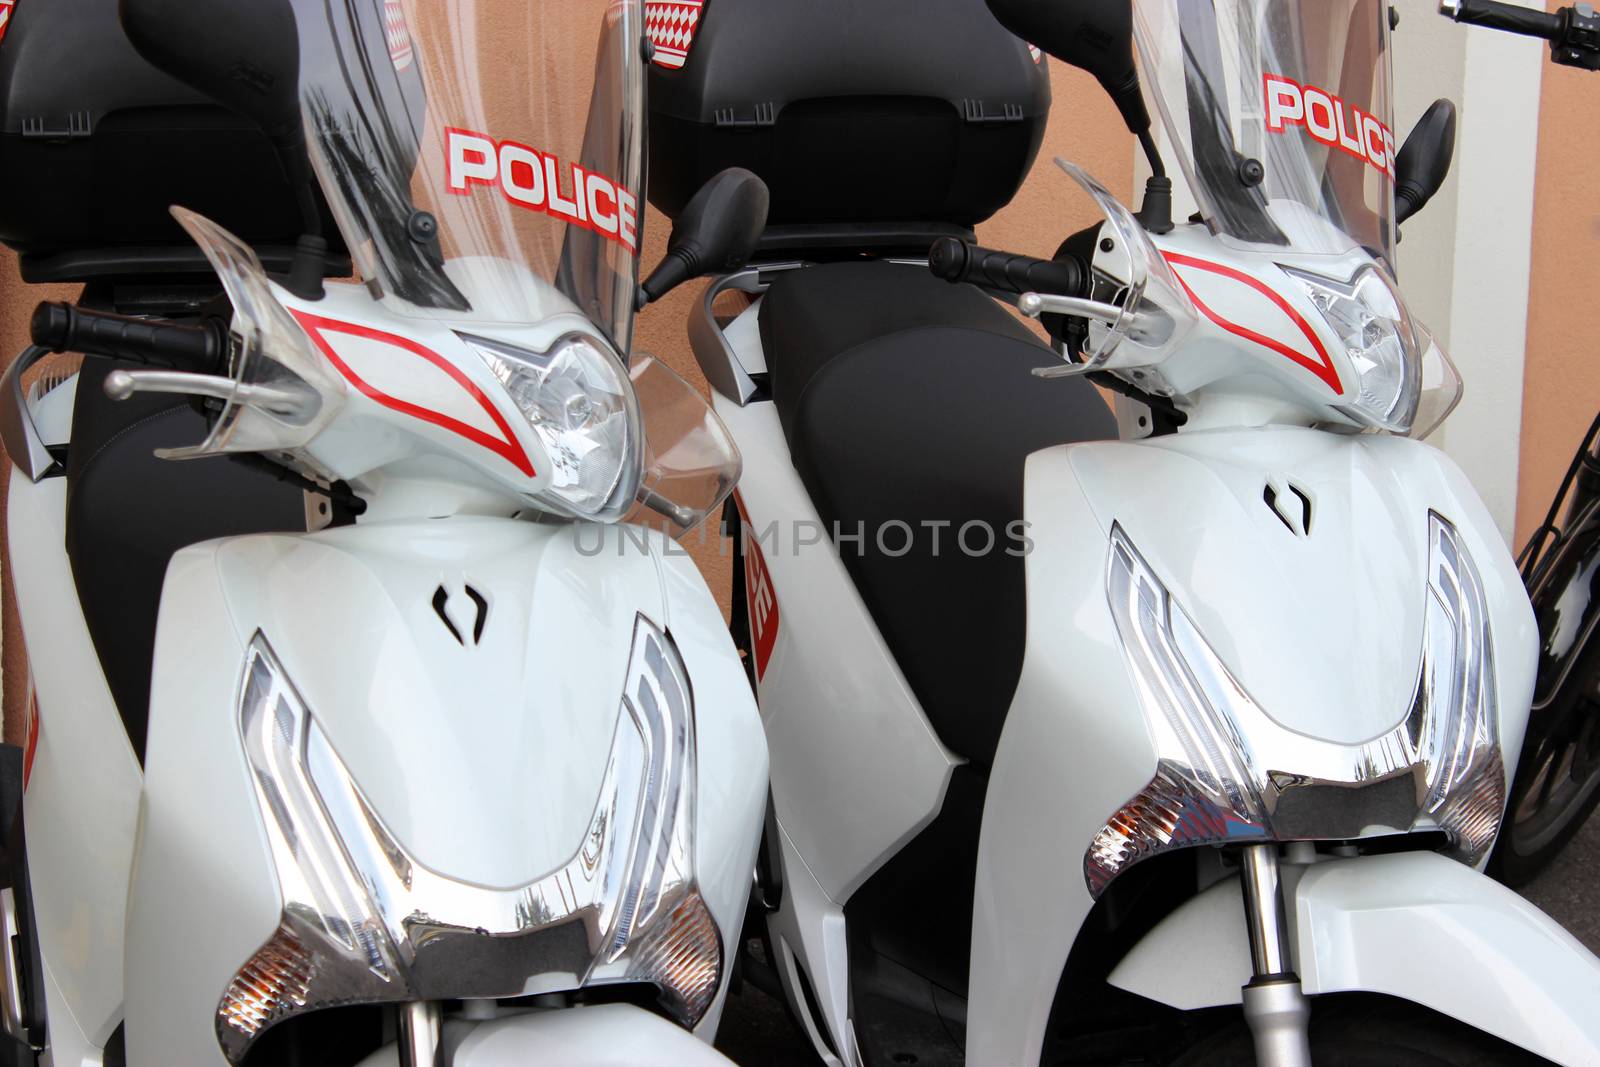 Police Scooters in Monaco by bensib